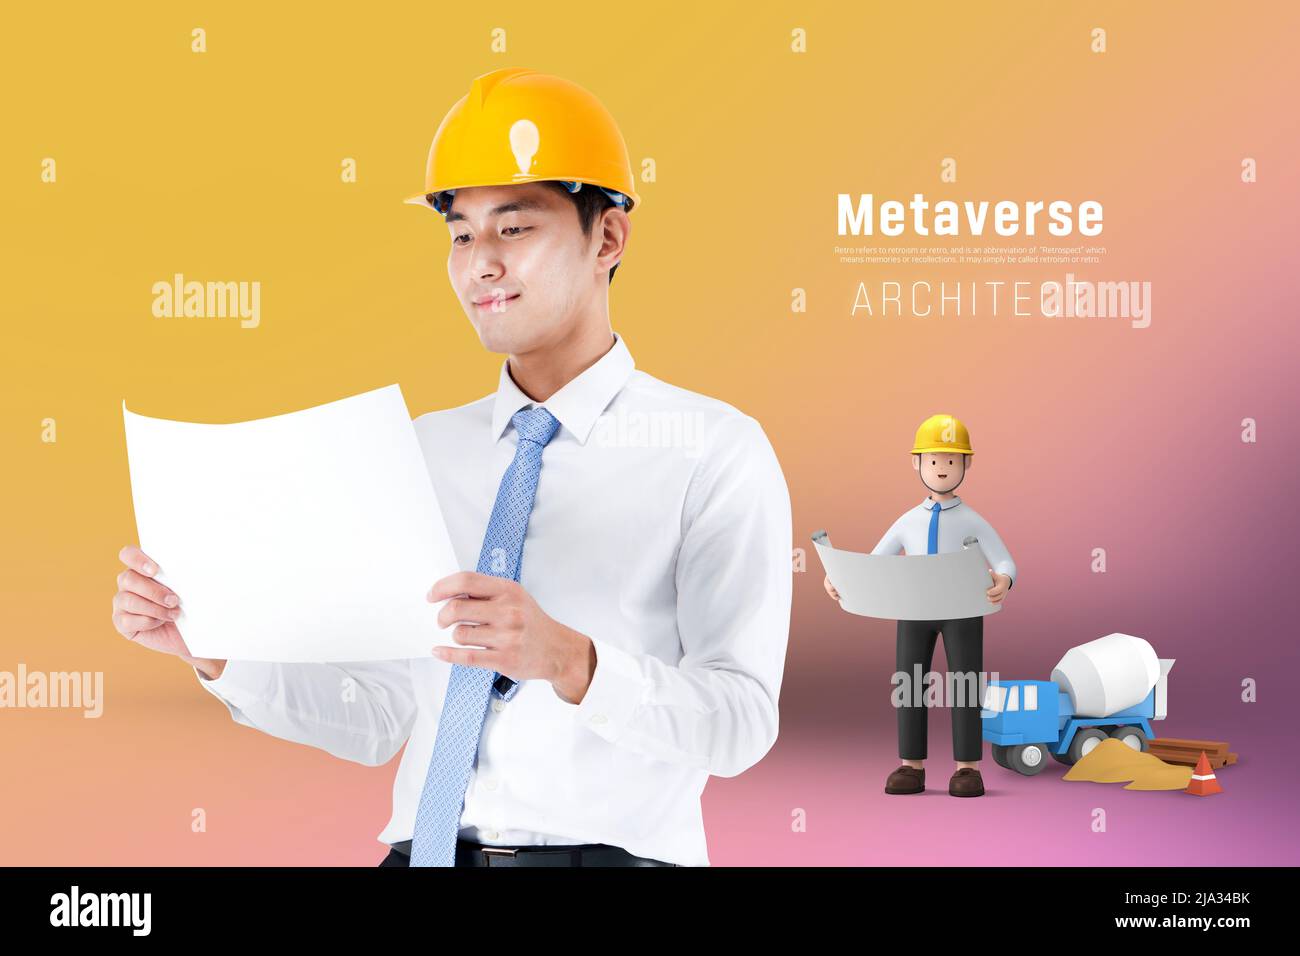 metaverse concept poster of 3d character and real person : architect Stock Photo